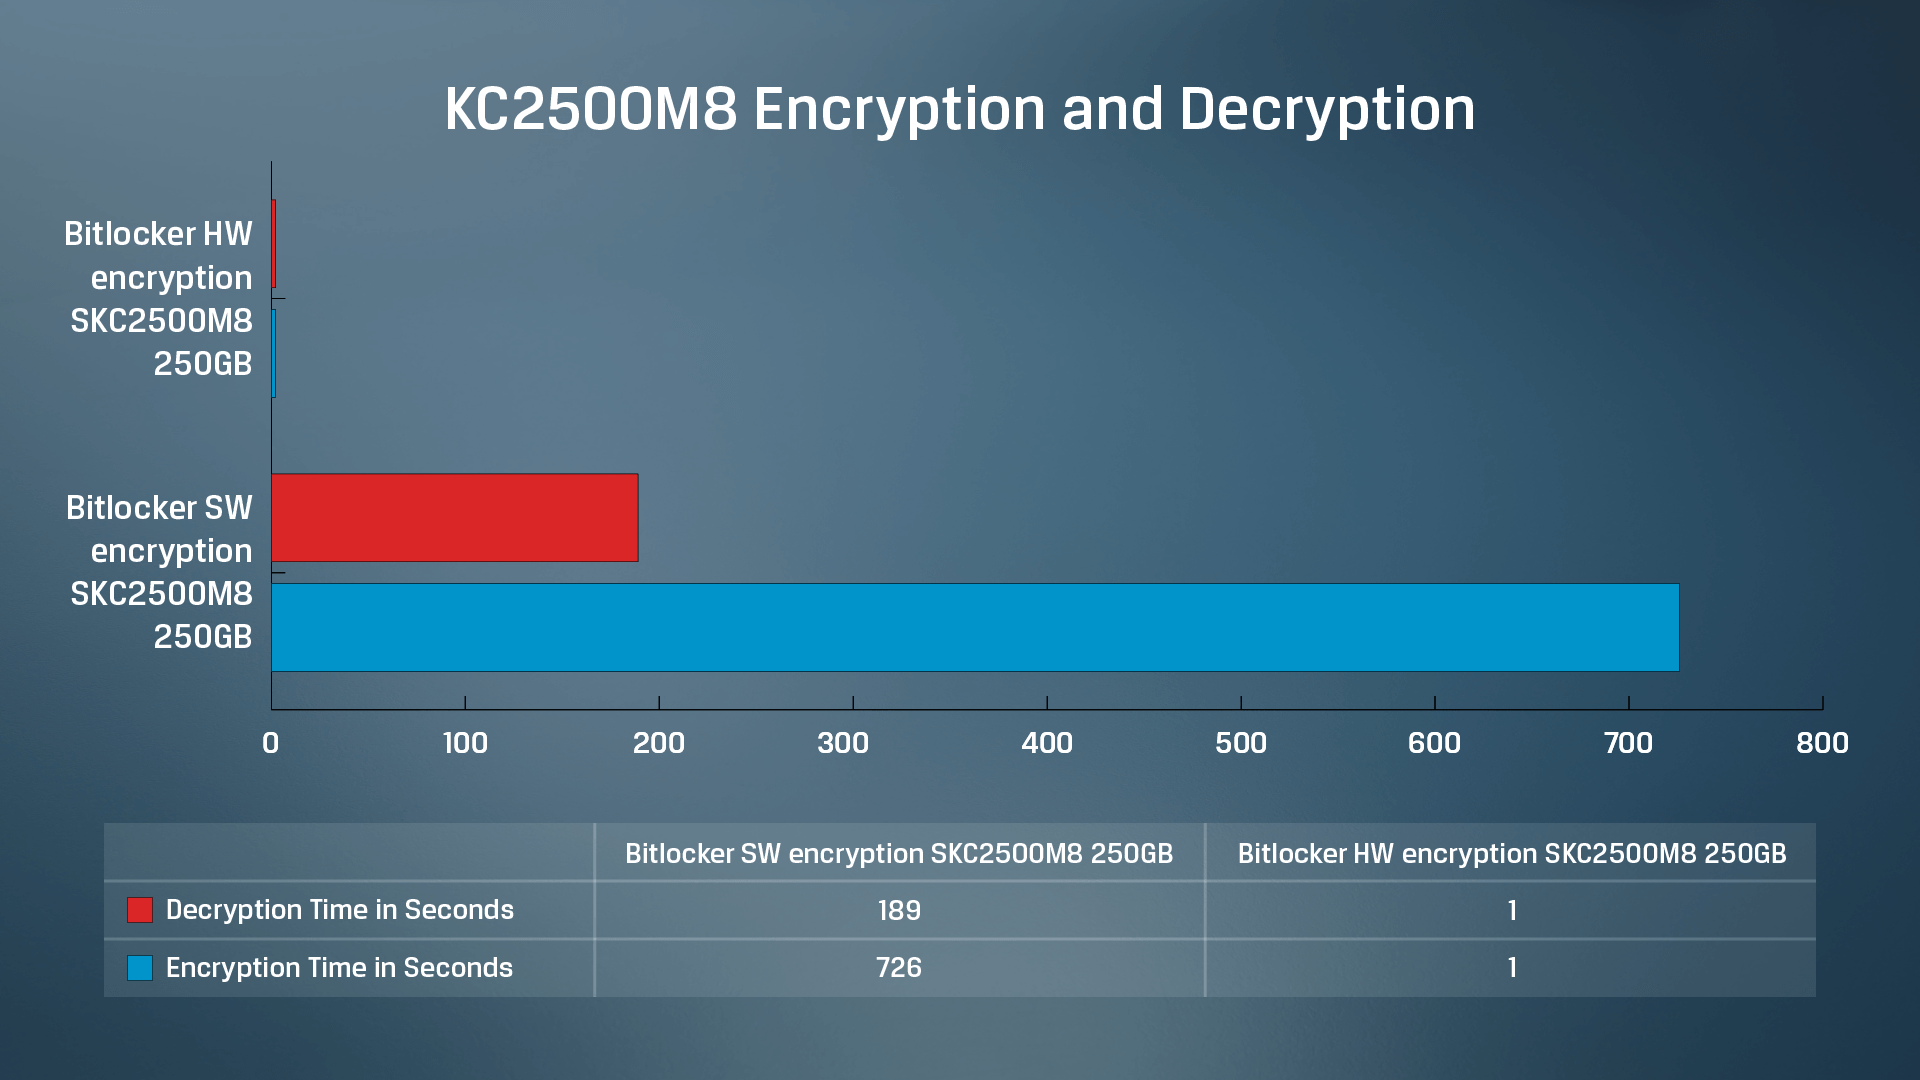 Kingston KC2500 SSD software vs hardware encryption and decryption data test results